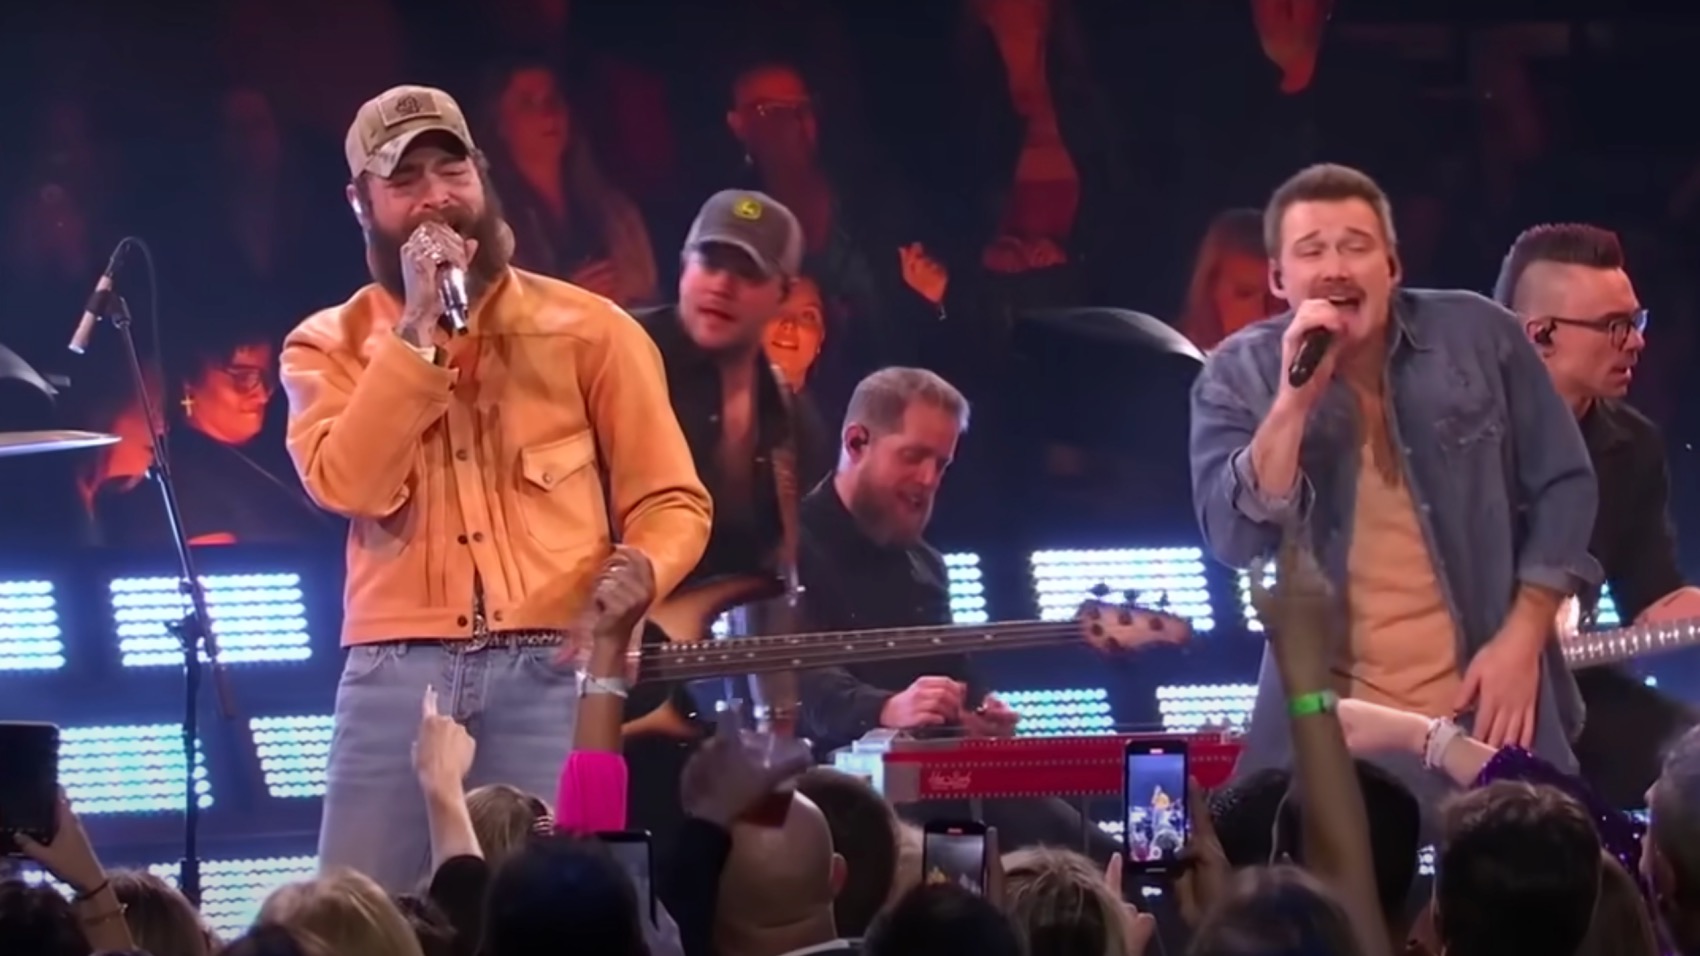 Post Malone, Morgan Wallen, and Hardy performance